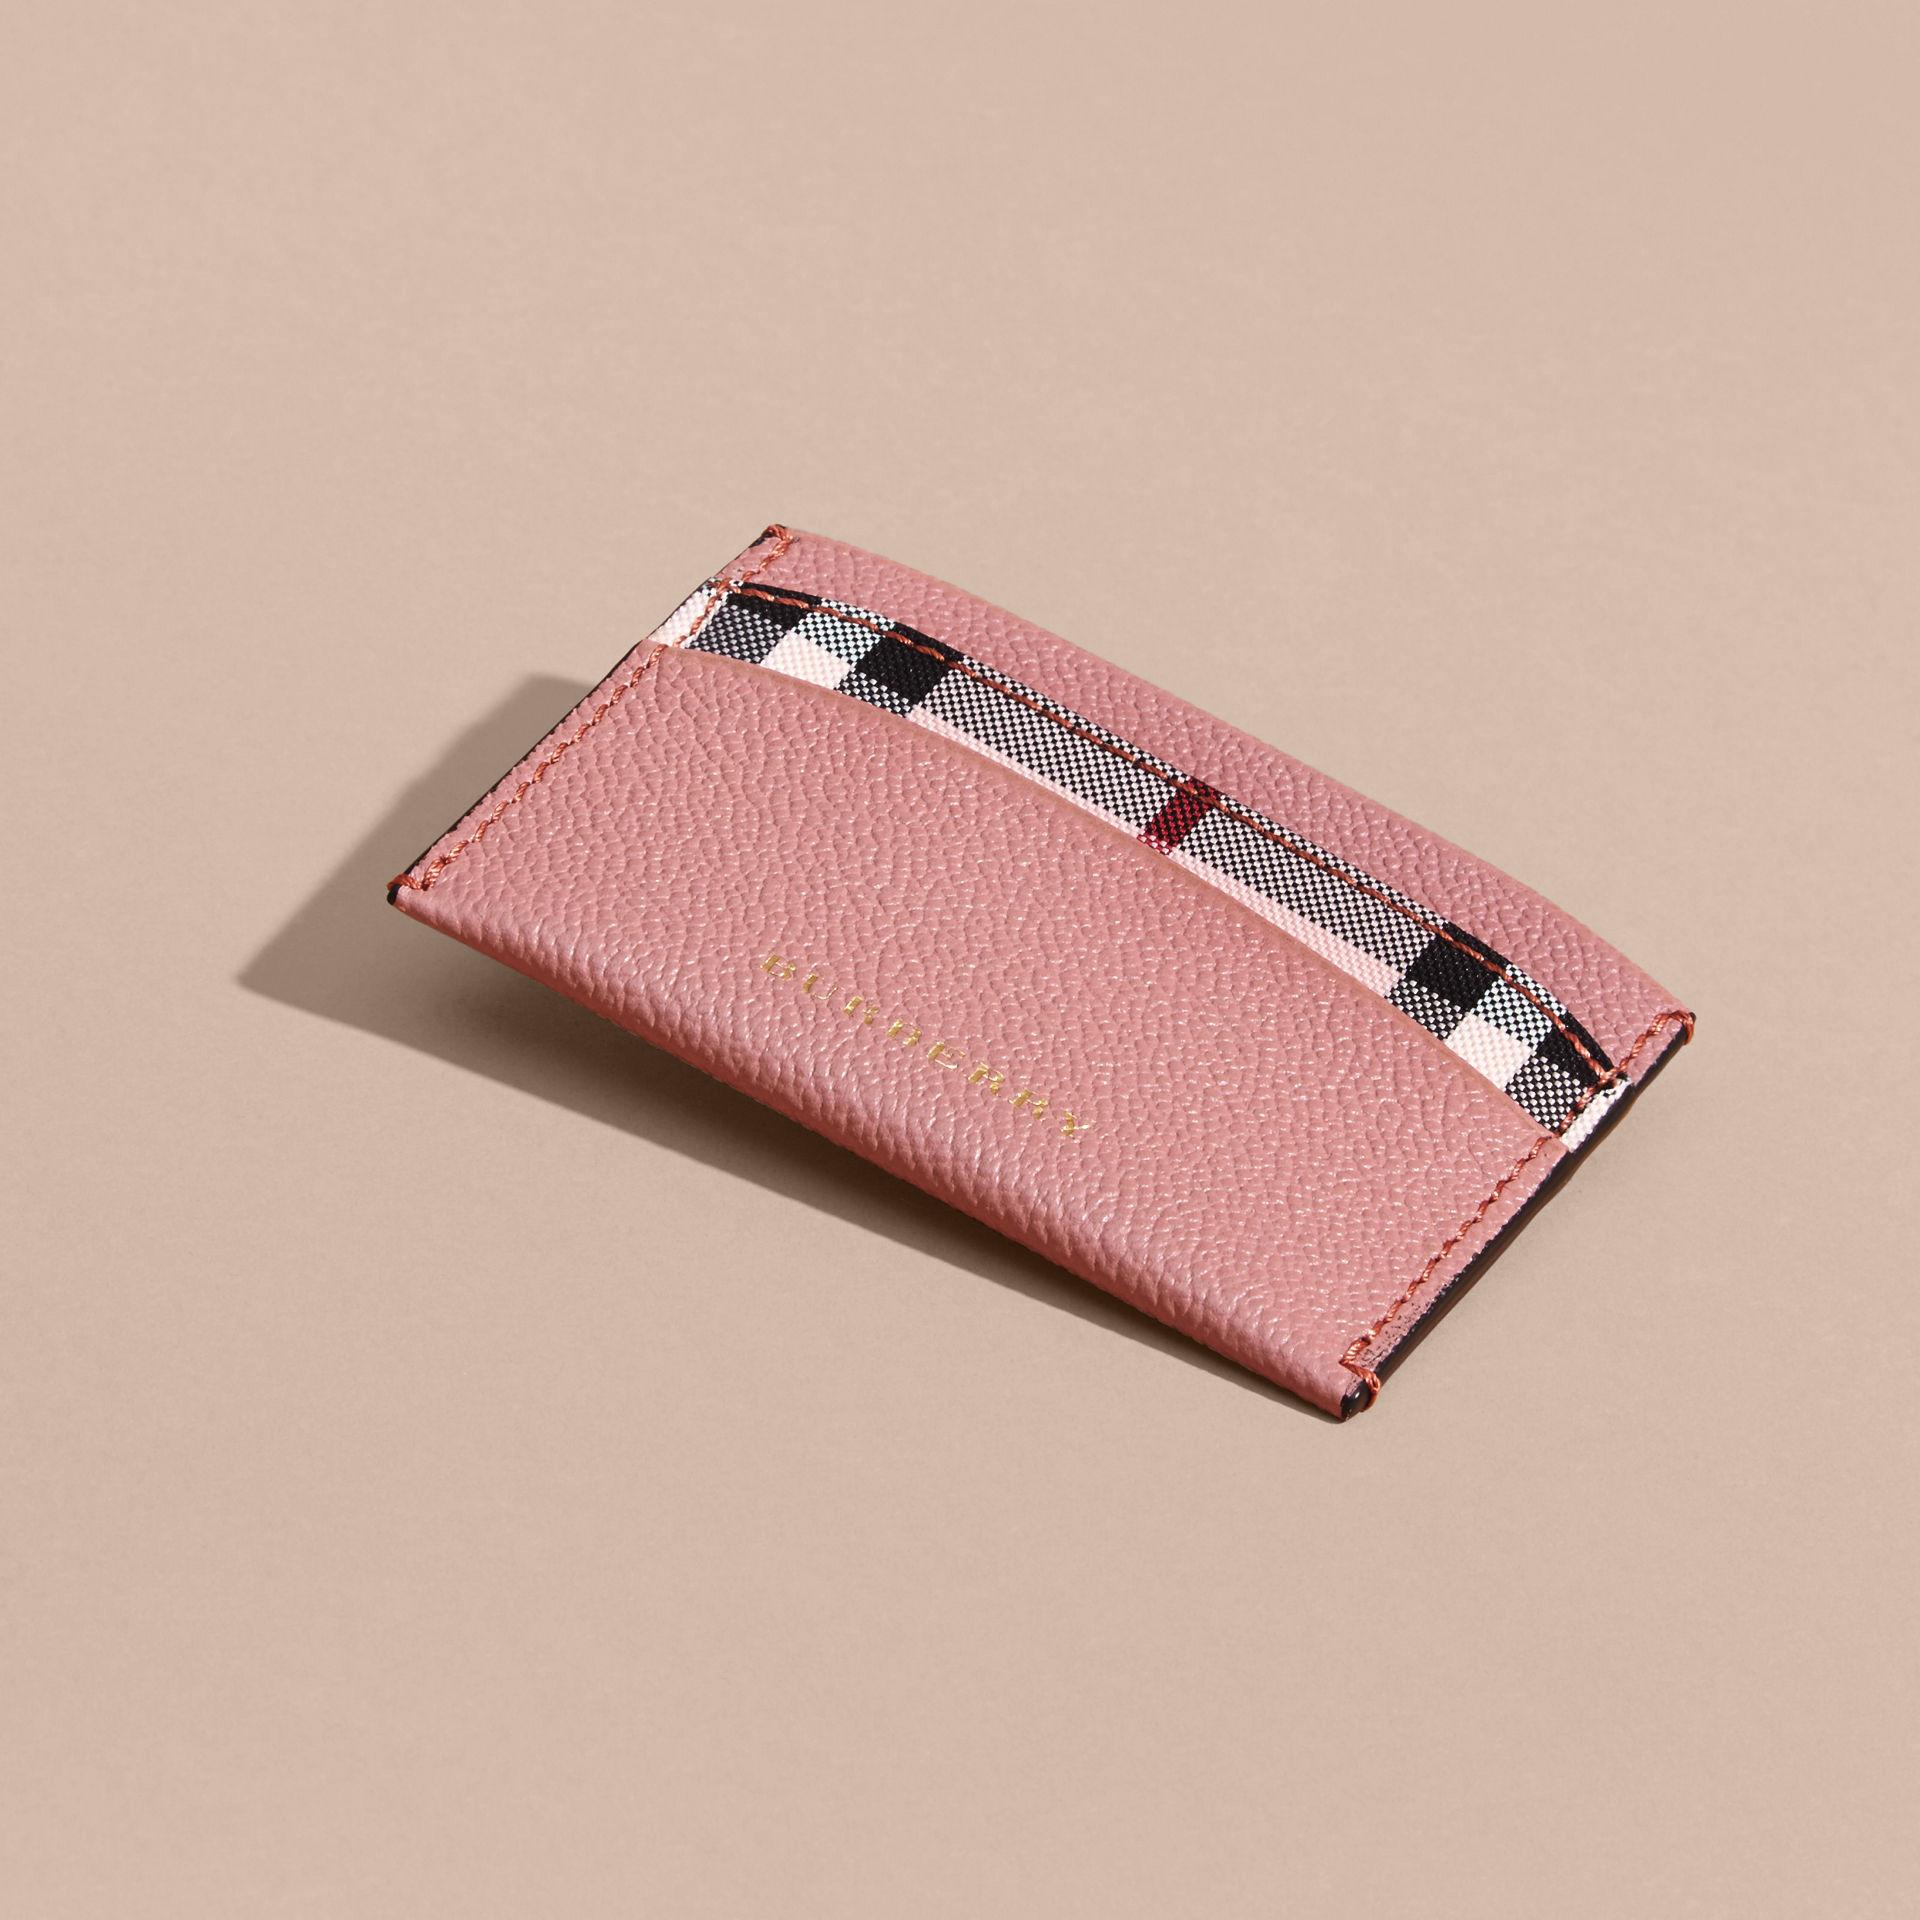 Burberry Pink/Beige Haymarket Check Coated Canvas and Leather Izzy Card  Holder Burberry